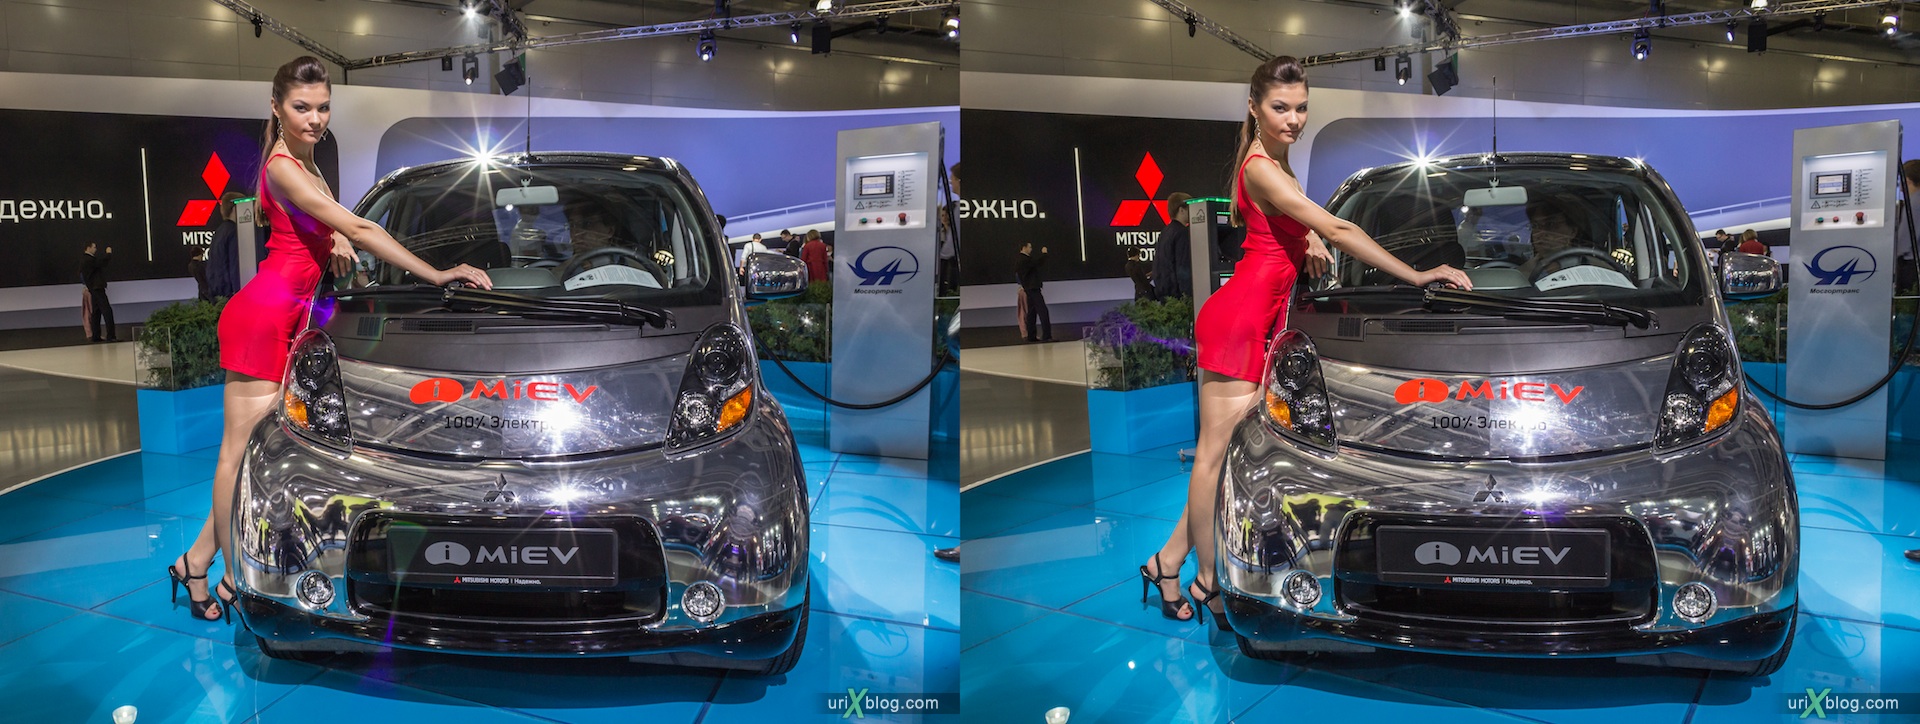 2012, i-Miev electro, girl, model, Moscow International Automobile Salon, auto show, 3D, stereo pair, cross-eyed, crossview